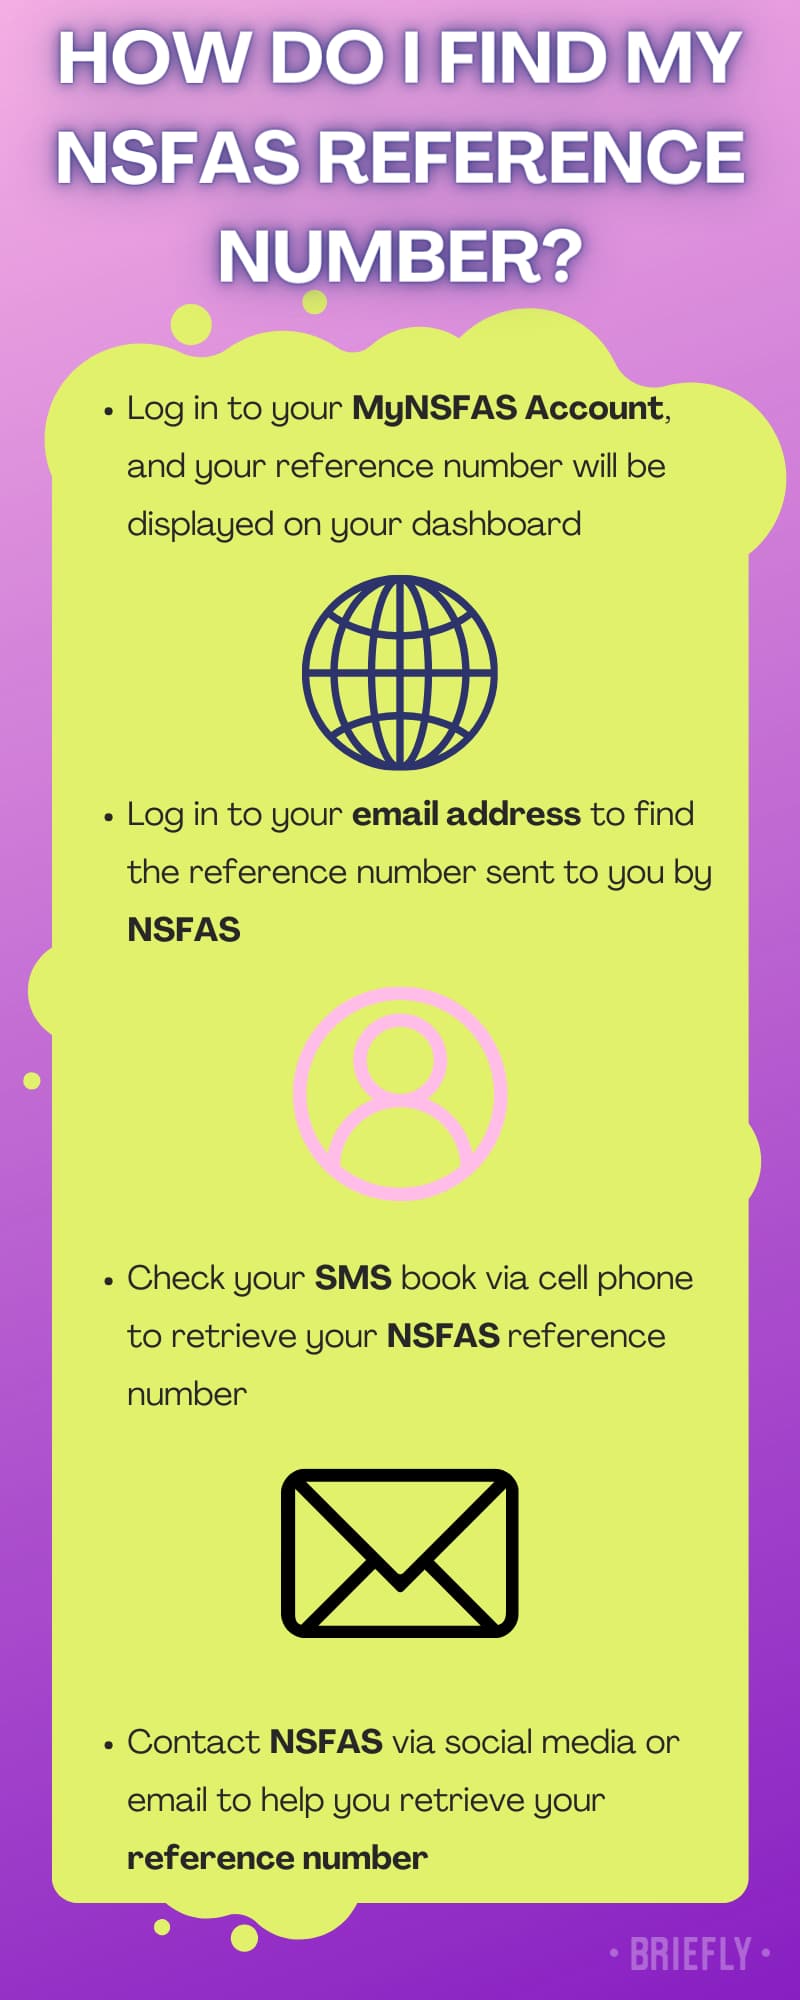 NSFAS reference number in South Africa